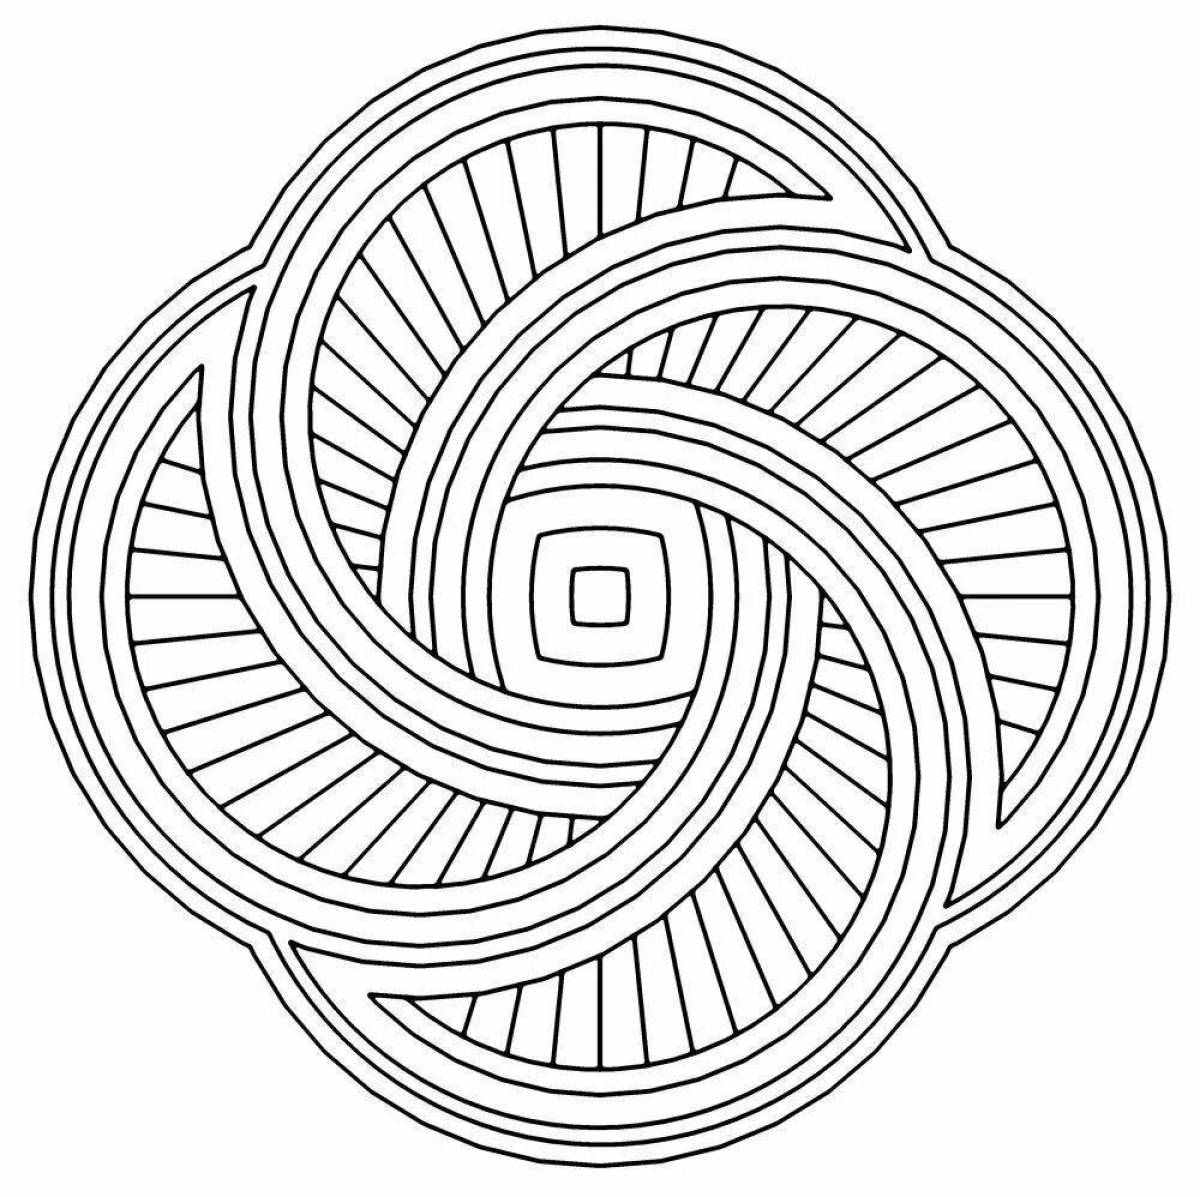 Create a coloring page with a playful circular spiral